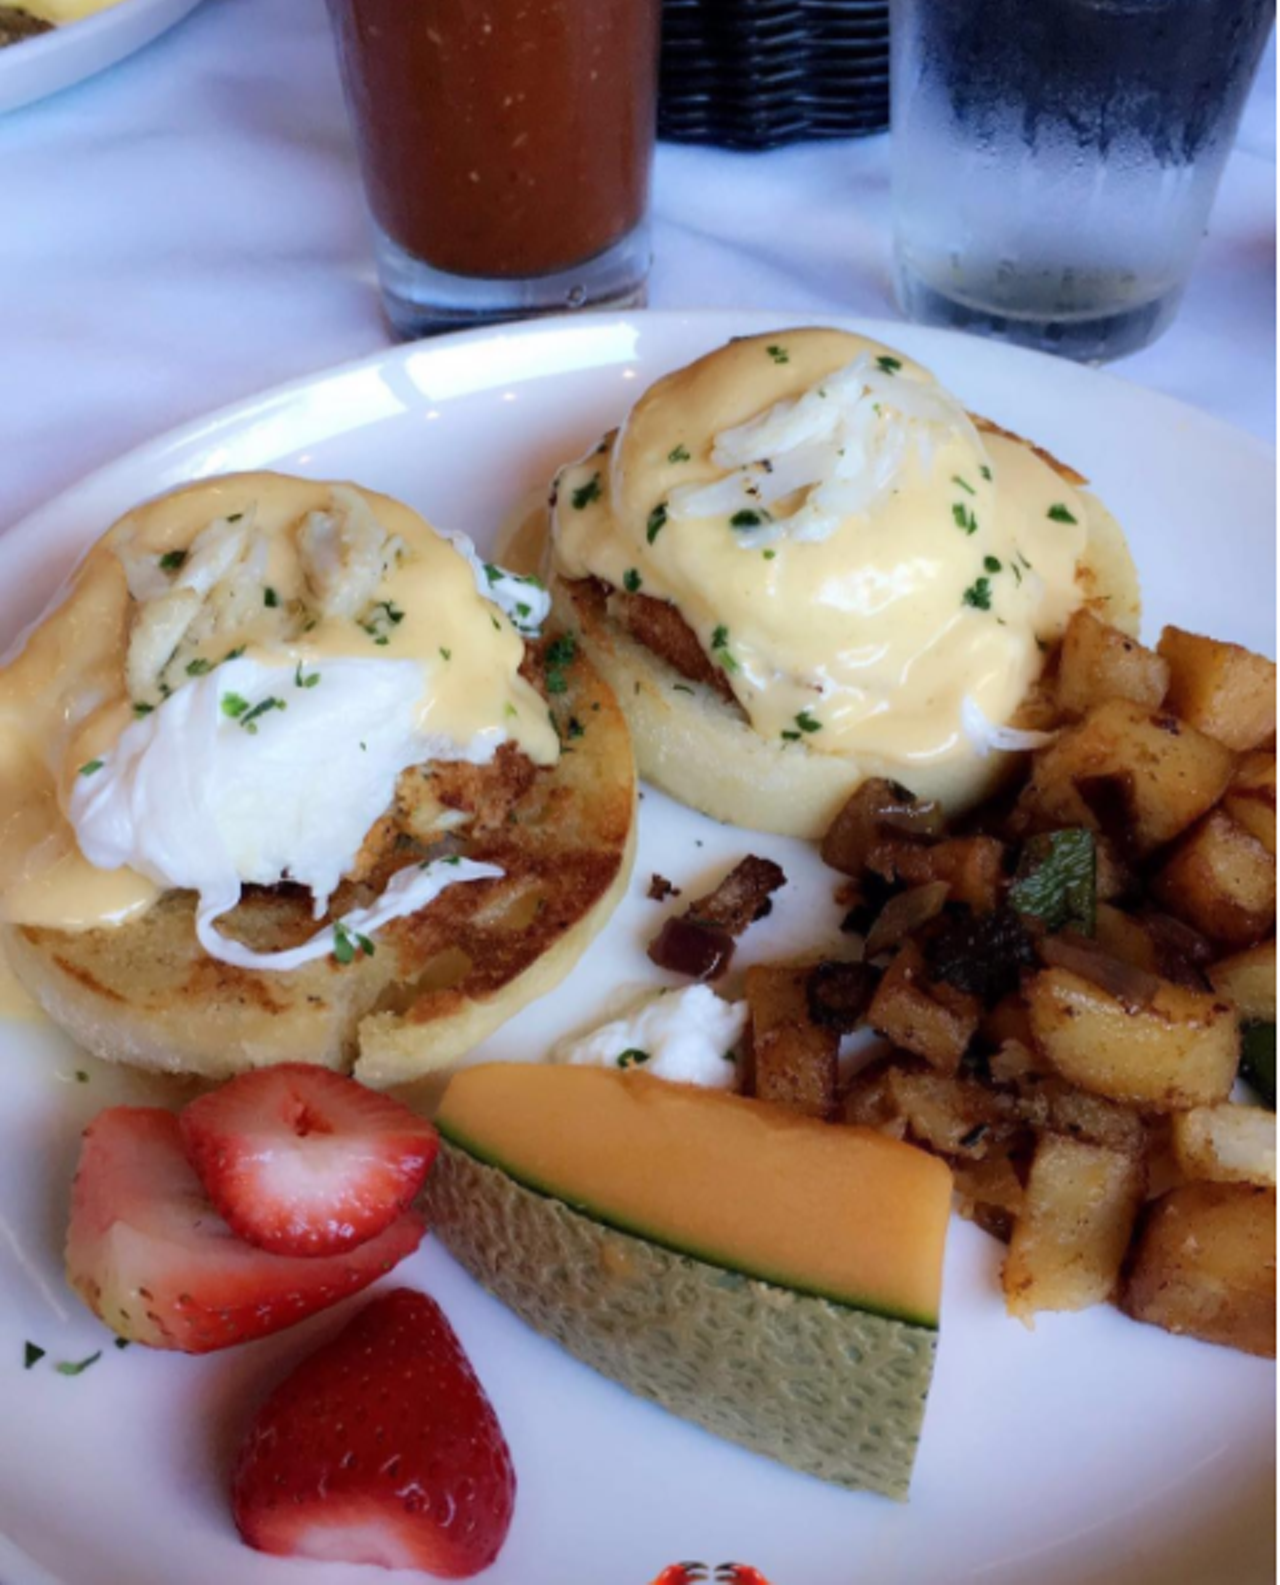 Cappy's
5011 Broadway, (210) 828-9669, cappysrestaurant.com
Cappy Lawton knows how to bring diners in for weekend brunch 10 a.m.-2:30 p.m. Saturday and 10 a.m.-3 p.m. Sunday.
Photo via Instagram, rojaspinoza